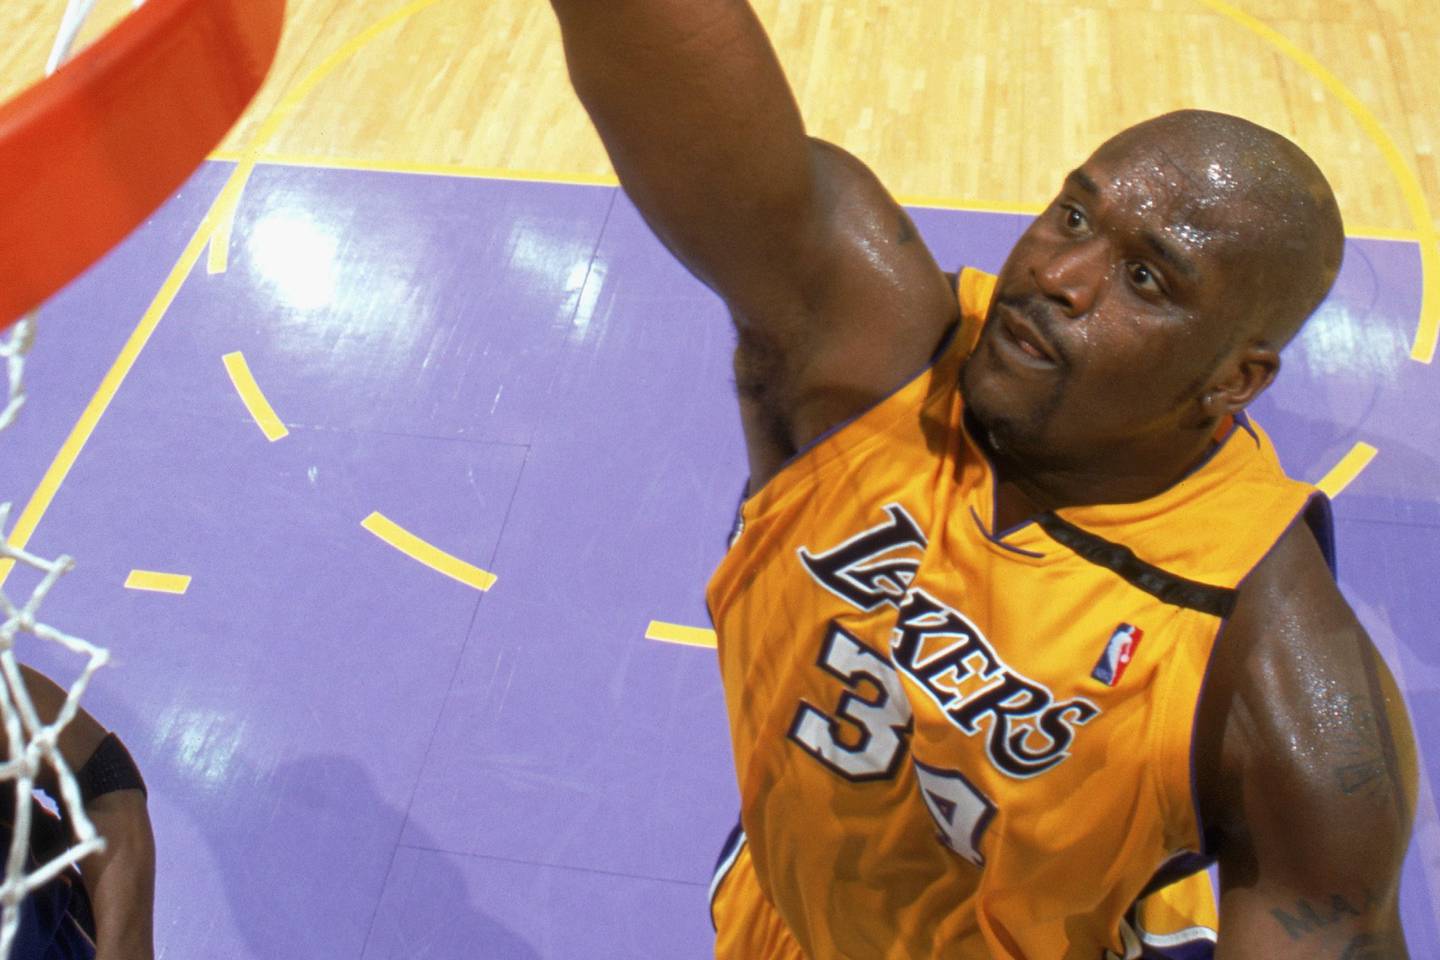 Basketball Movie All-Stars headlined by Shaquille O'Neal - Sports